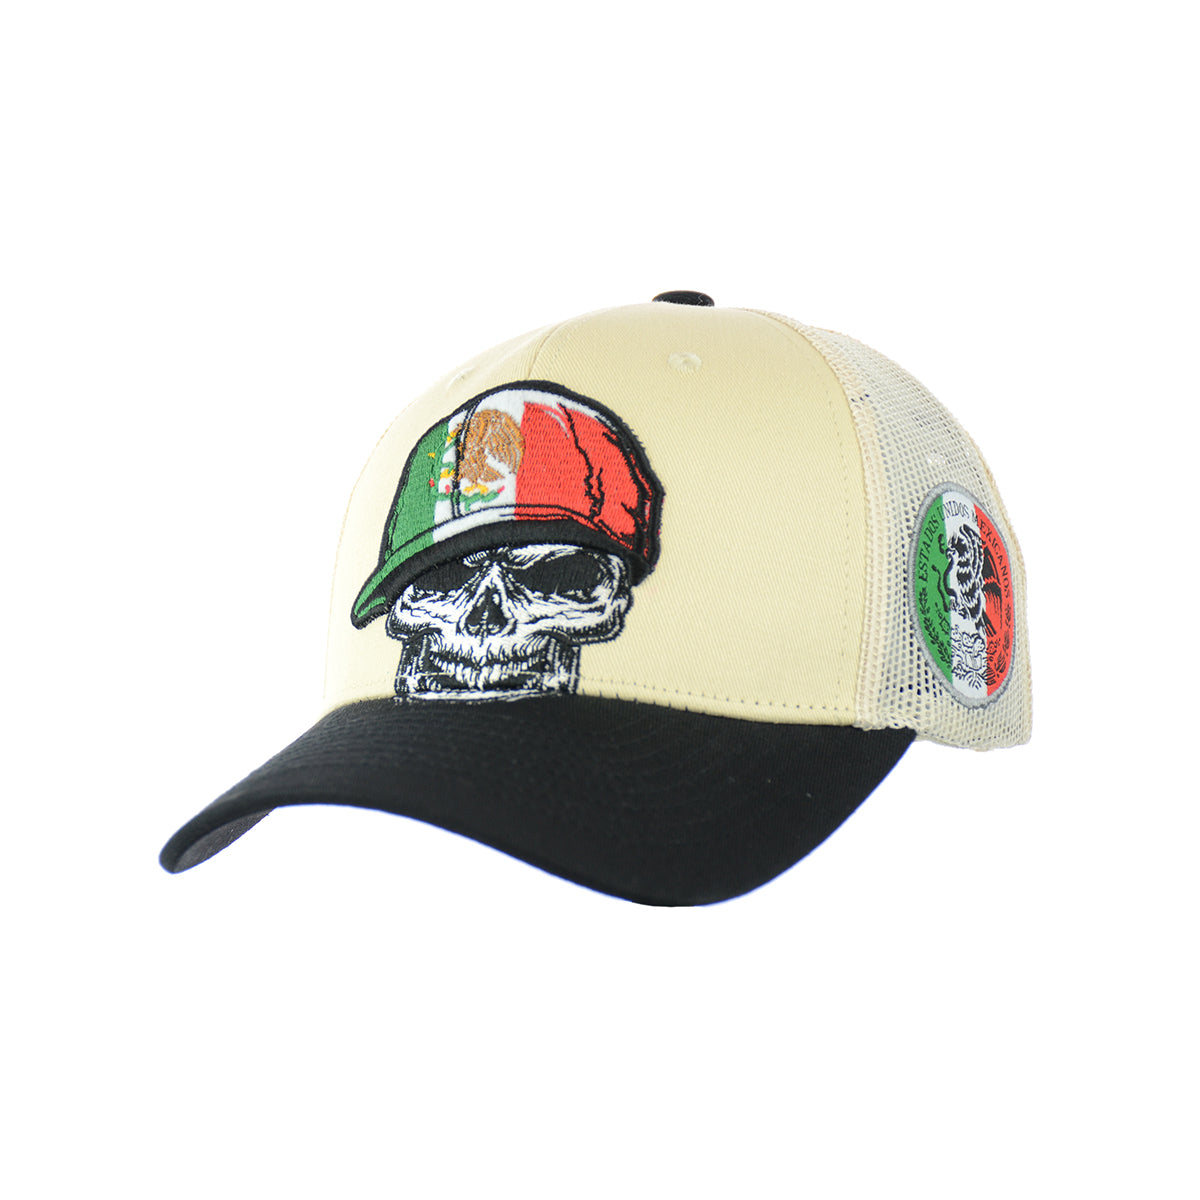 Skull Mexican Flat Hat Embroidered Snapback